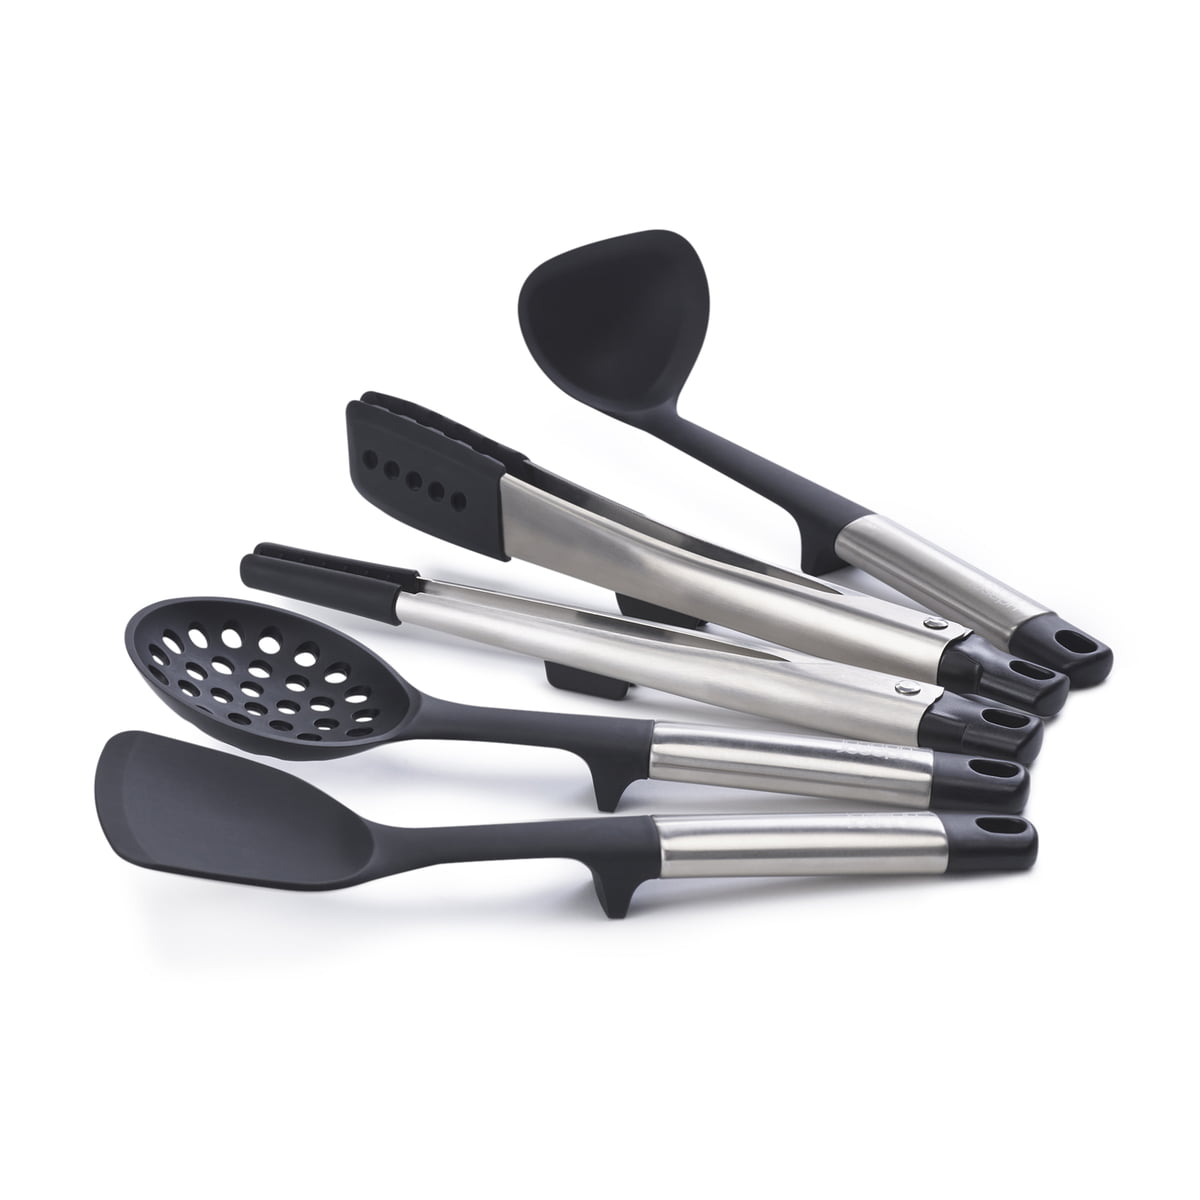 6pcs Essentials Kitchen Stainless Steel Gadget Set With Soft Touch